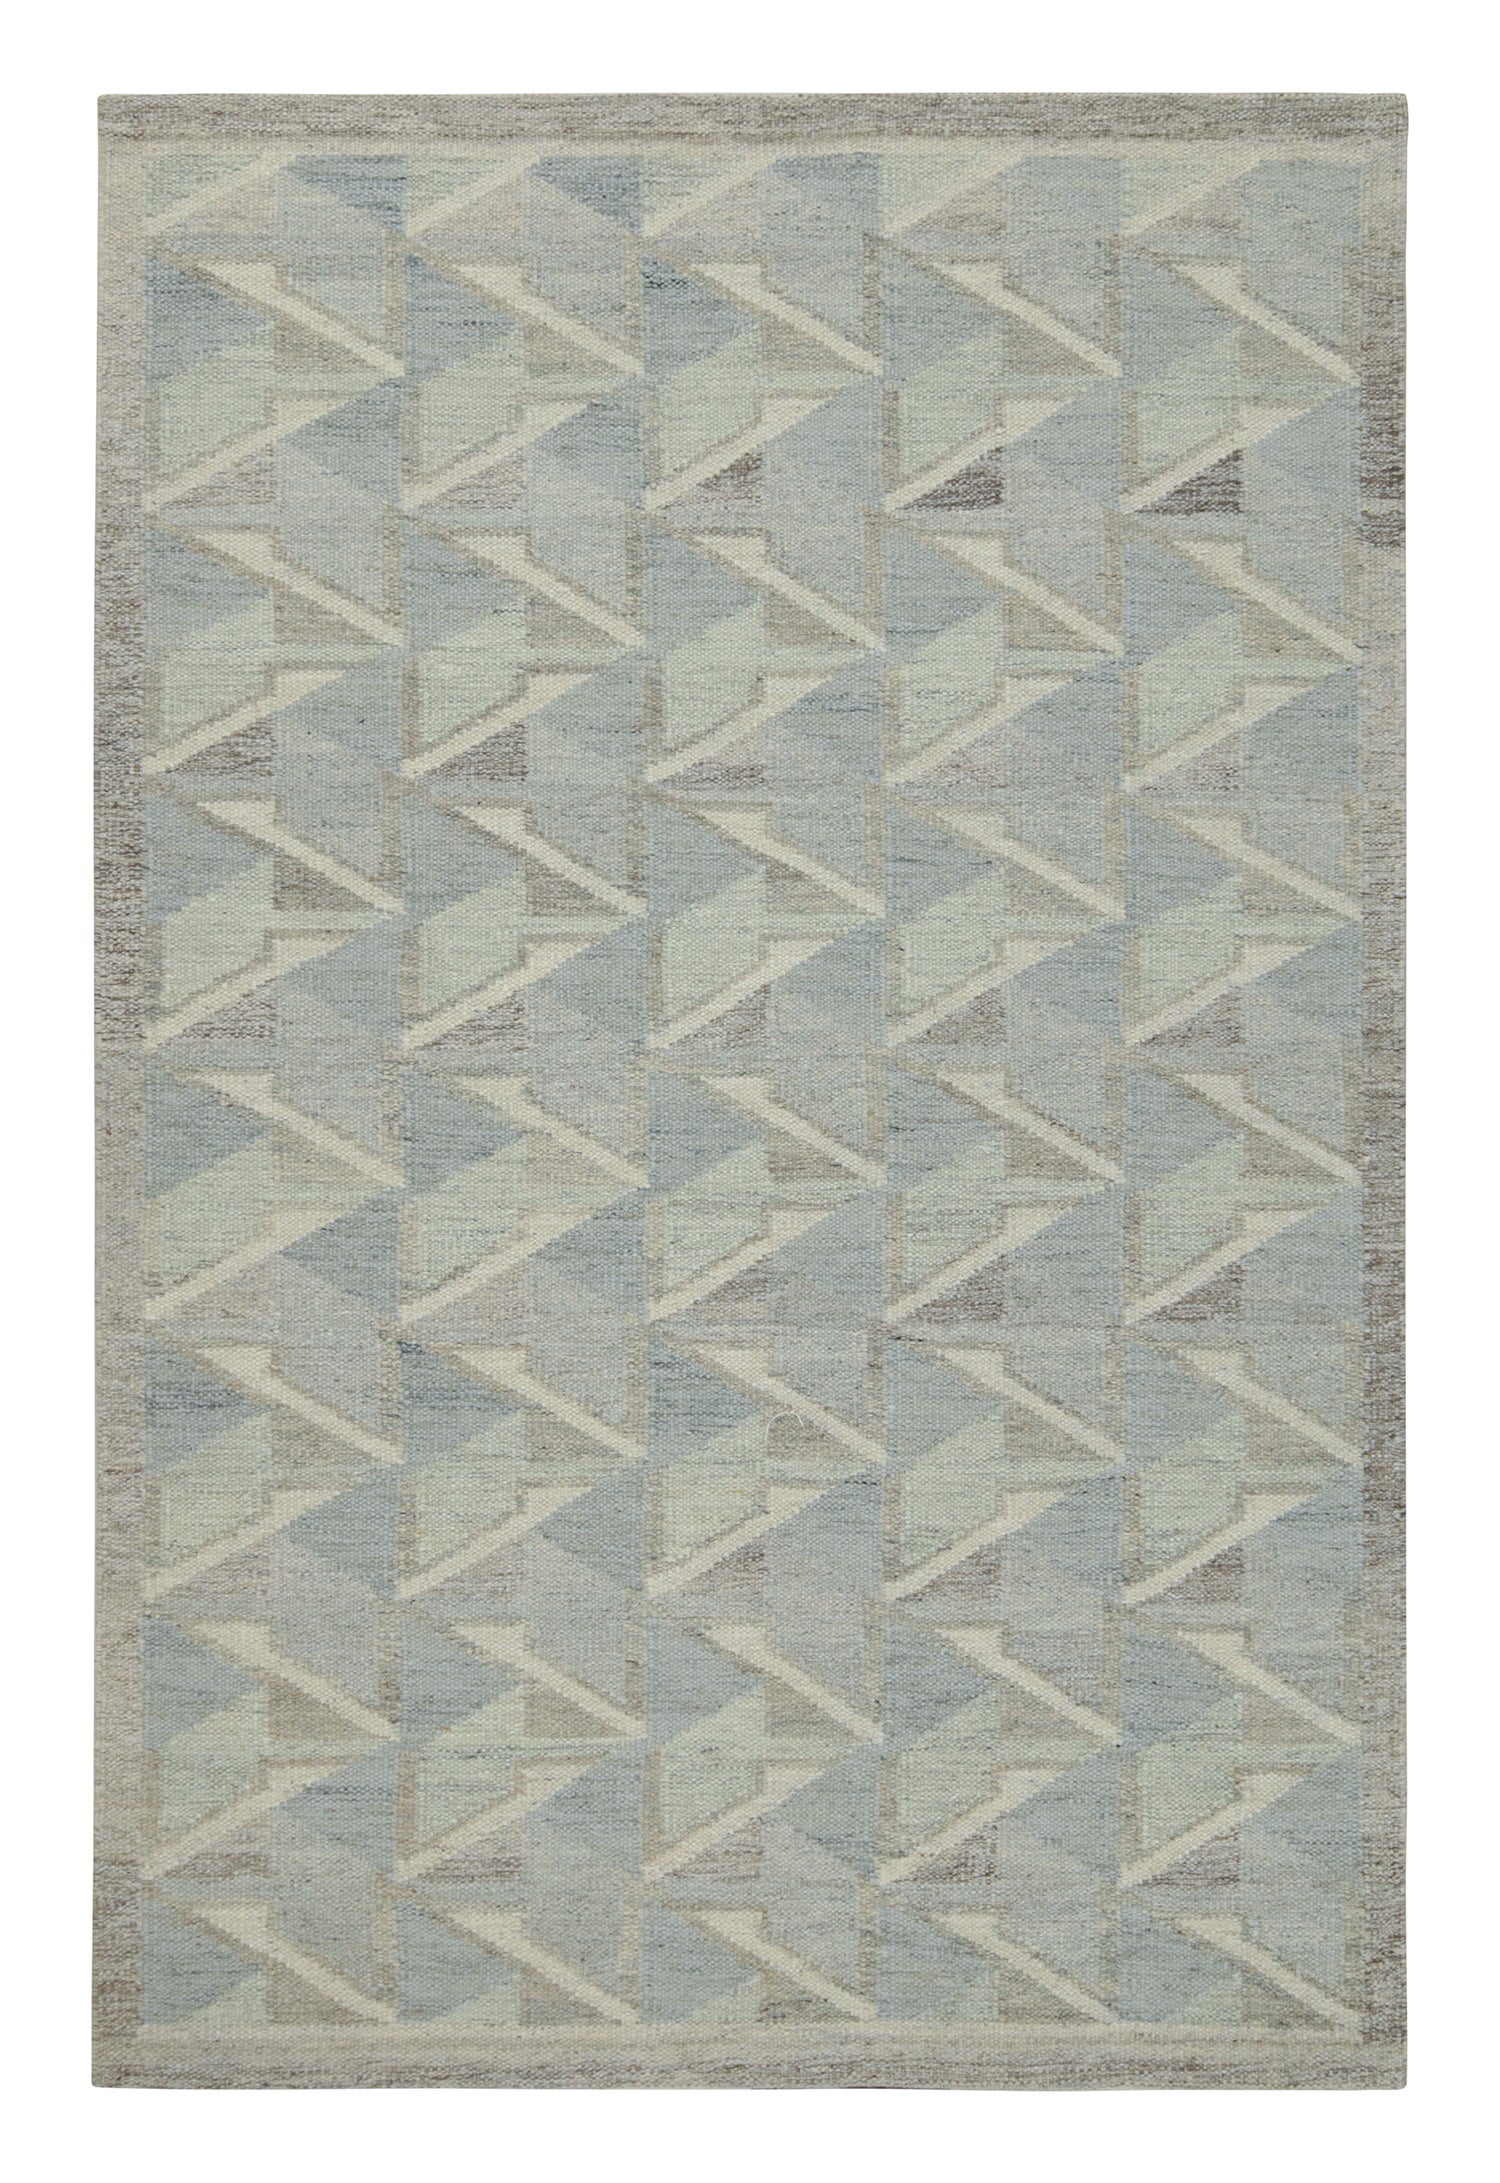 Rug & Kilim’s Scandinavian Style Kilim in Blue, Grey and White Geometric Pattern For Sale